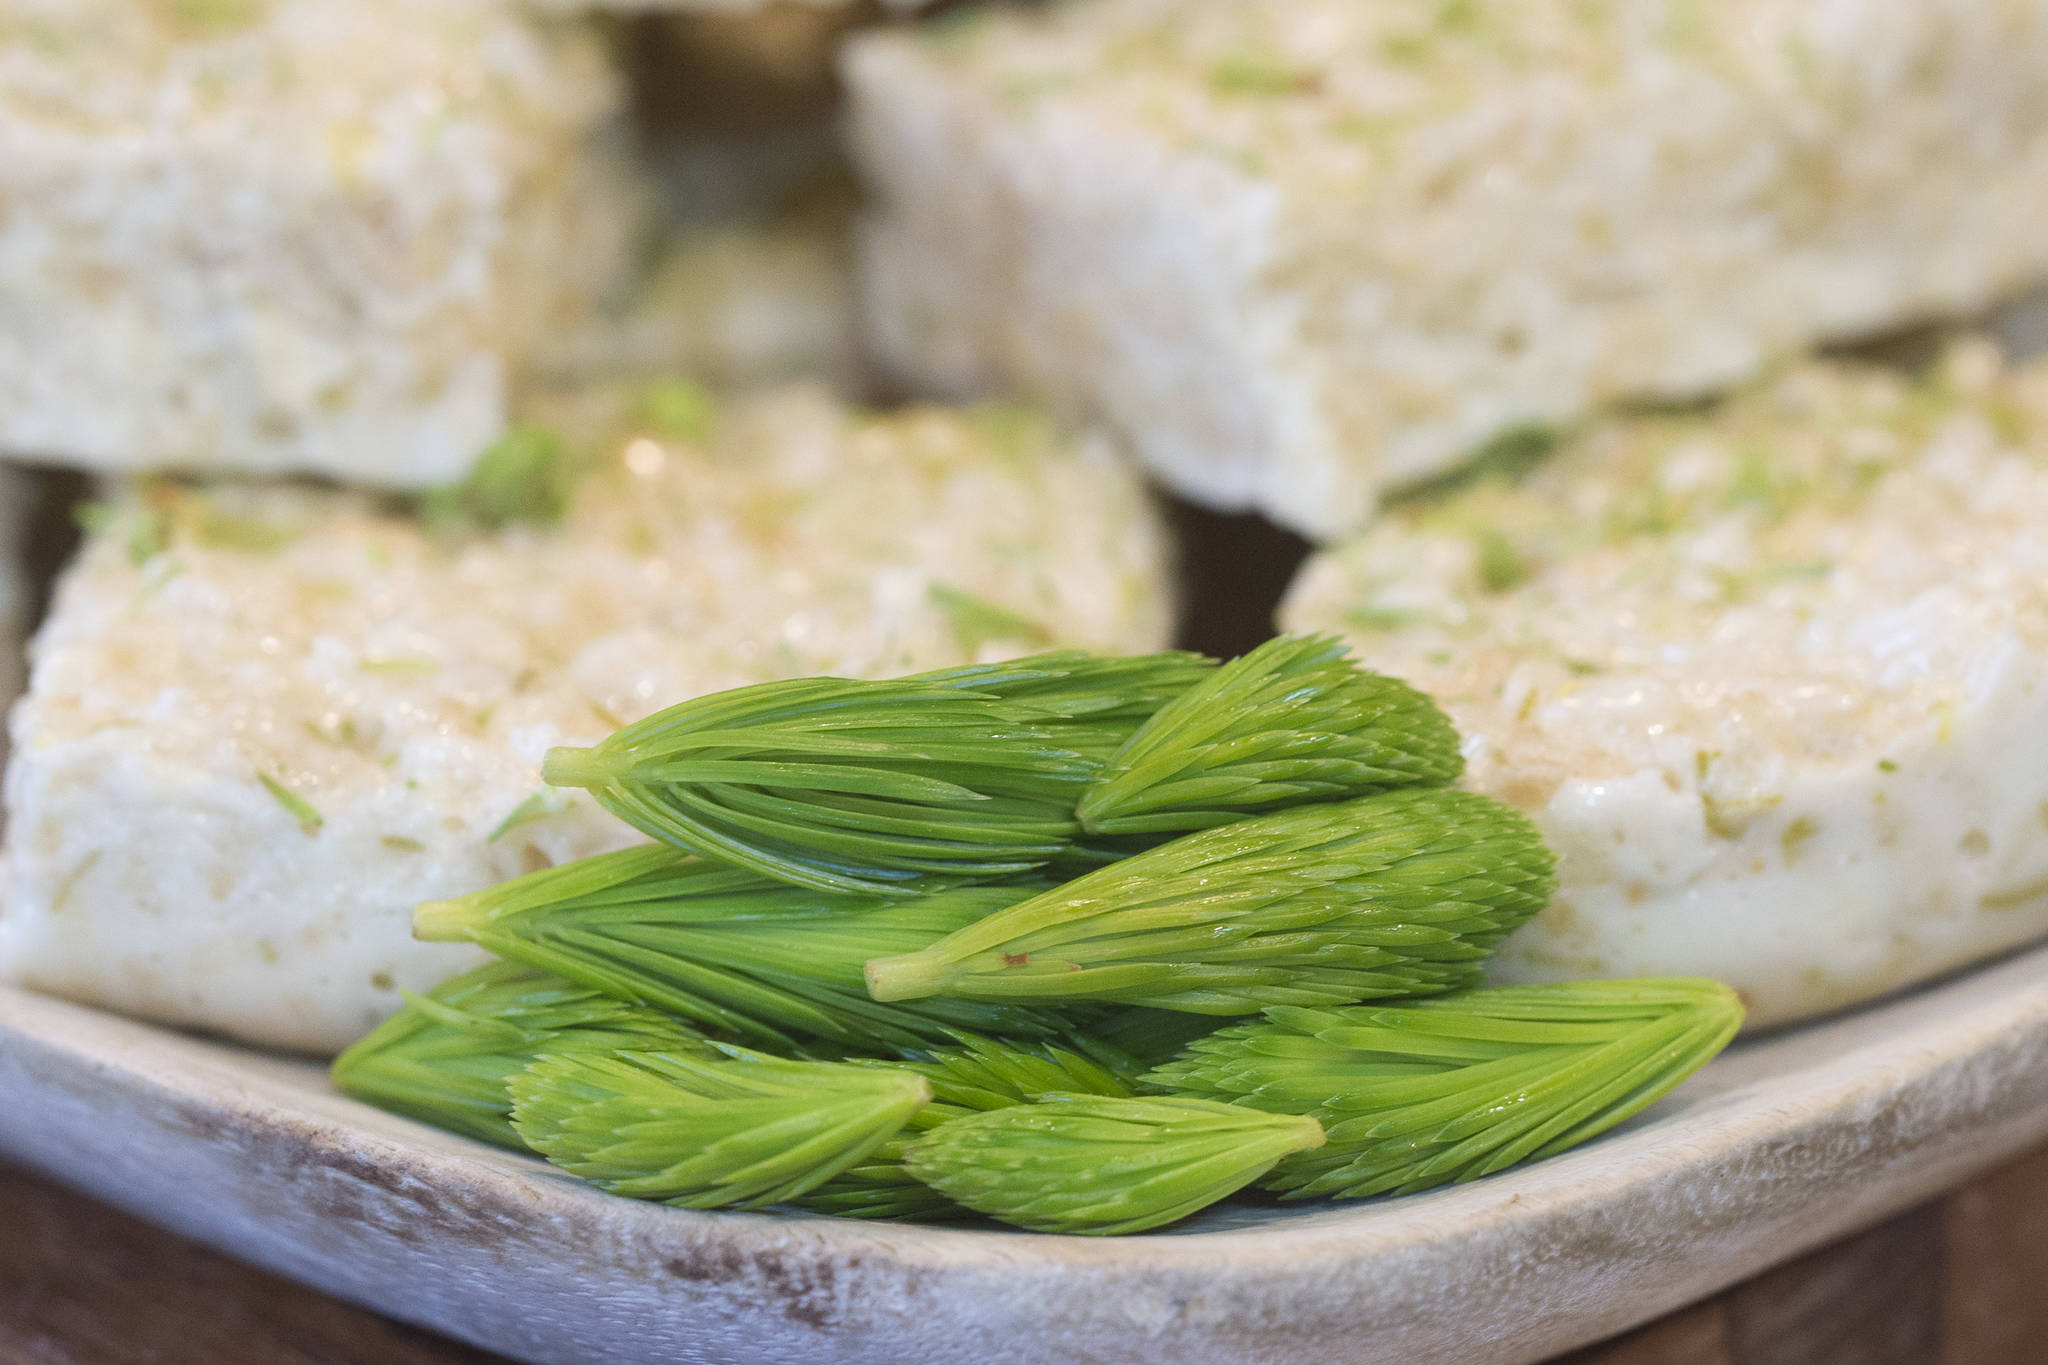 Spruce up a classic: Locally foraged spruce tips make great rice krispie topper